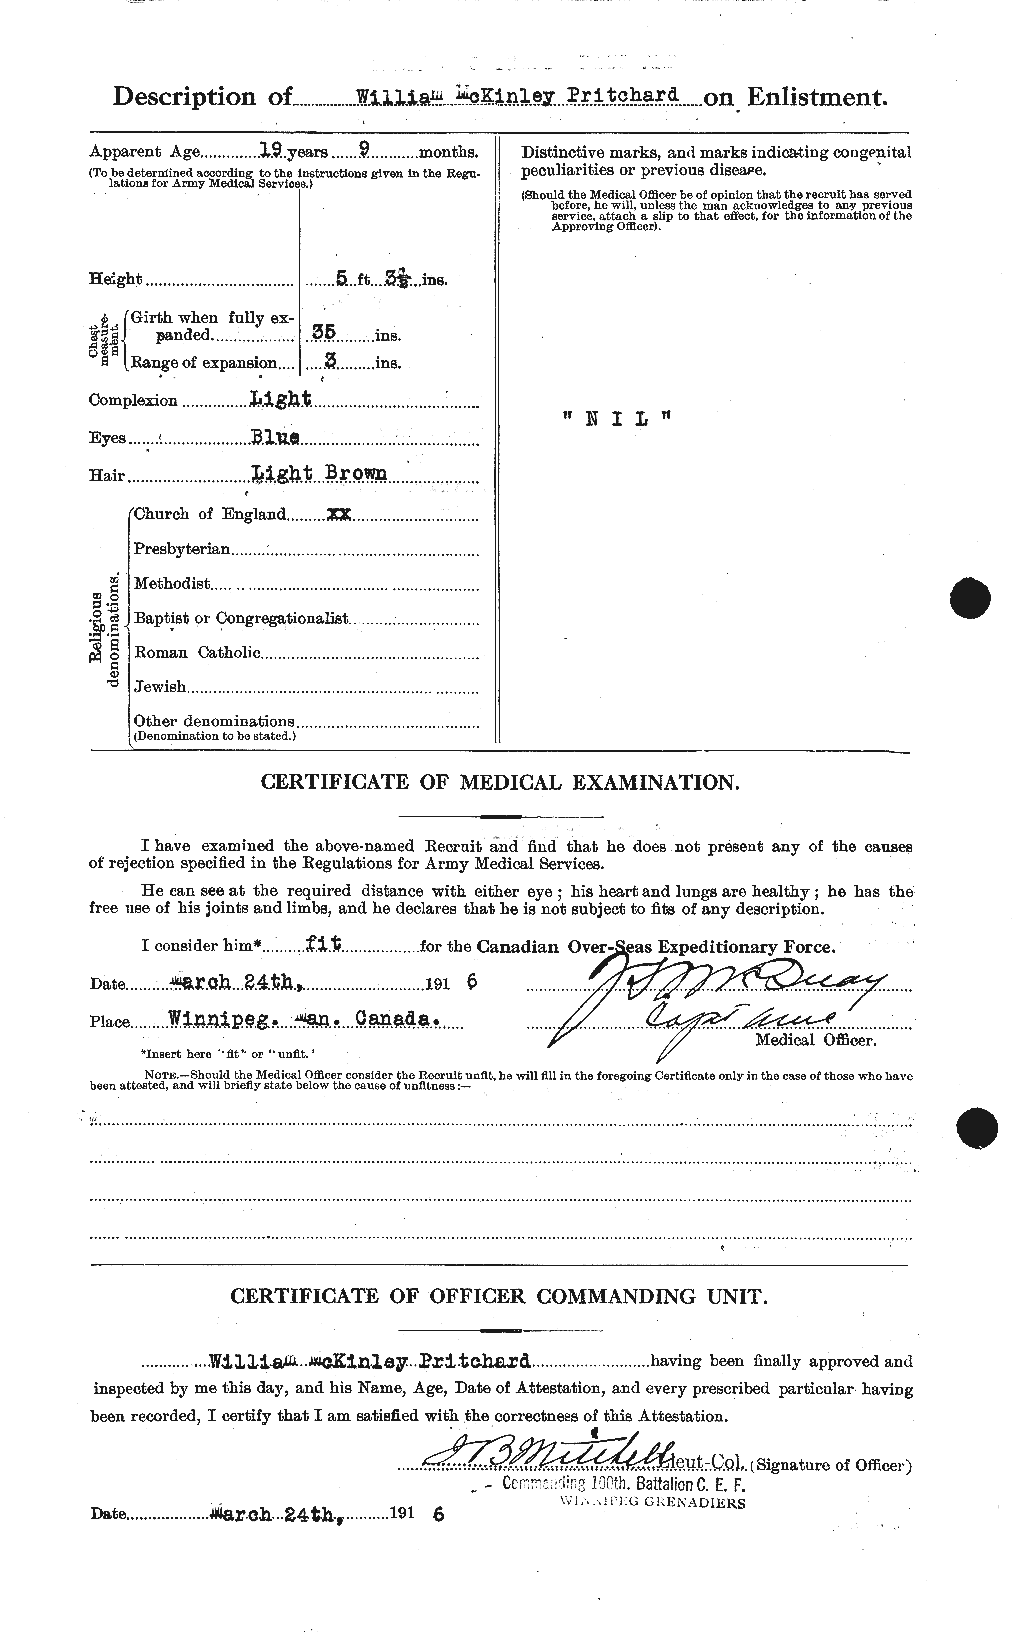 Personnel Records of the First World War - CEF 588632b